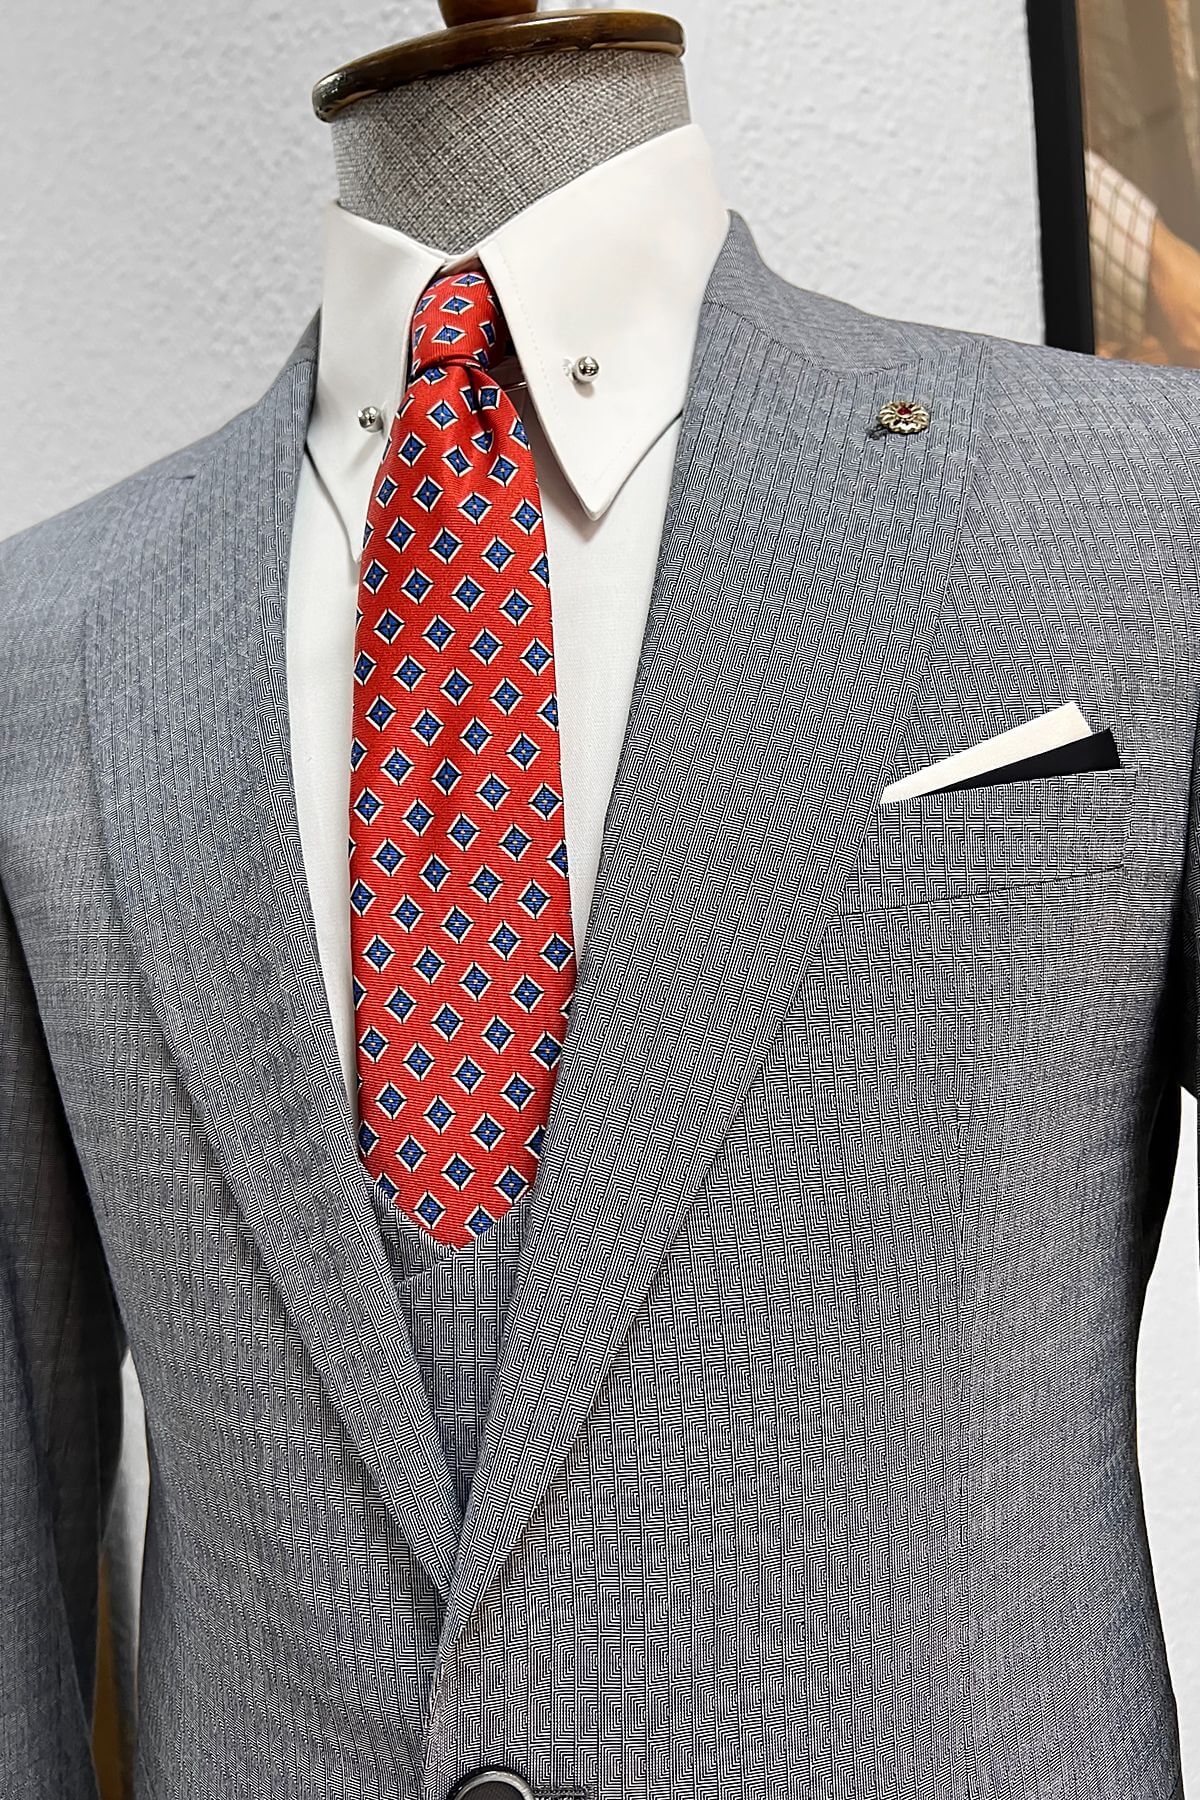 A Slim-fit Gray&Navyblue Wool Suit on display